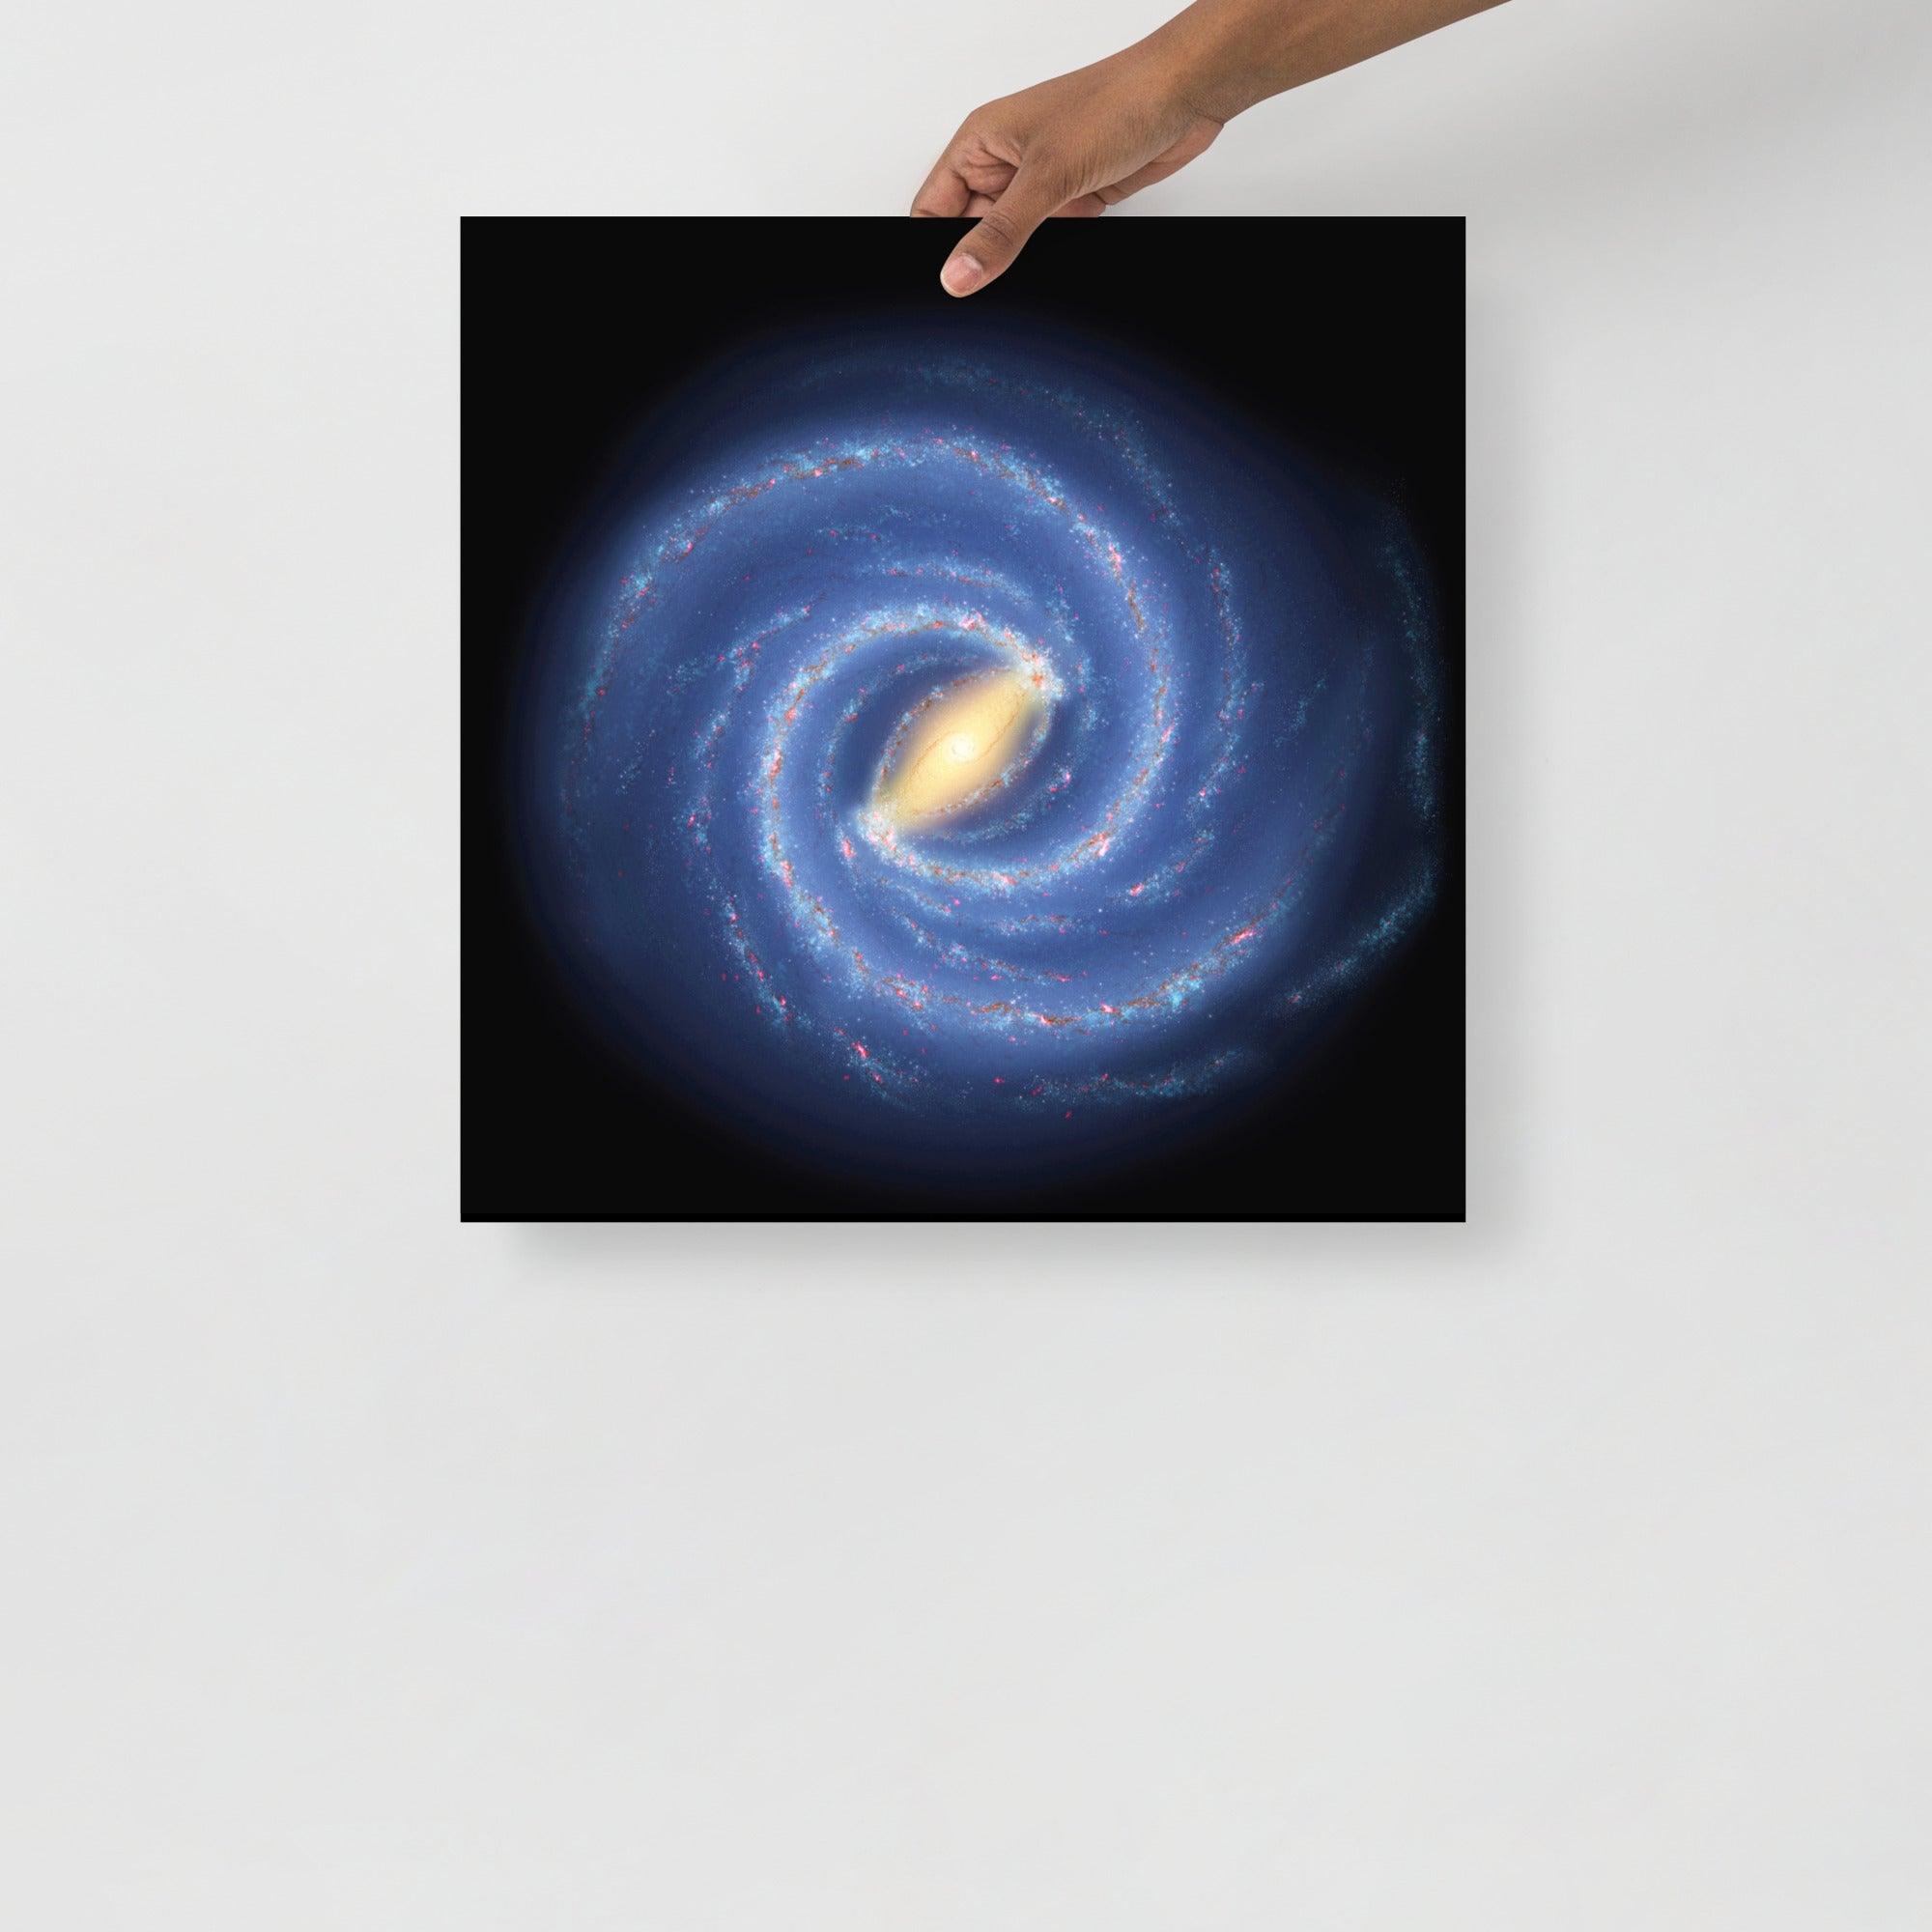 The Milky Way Galaxy poster on a plain backdrop in size 18x18”.